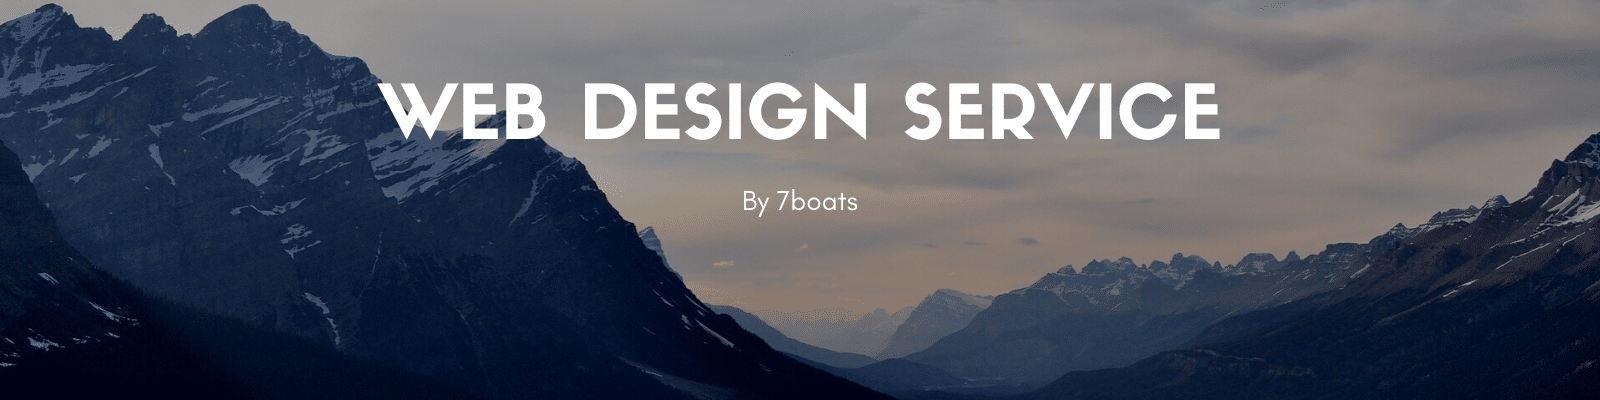 Web Design Service by 7boats